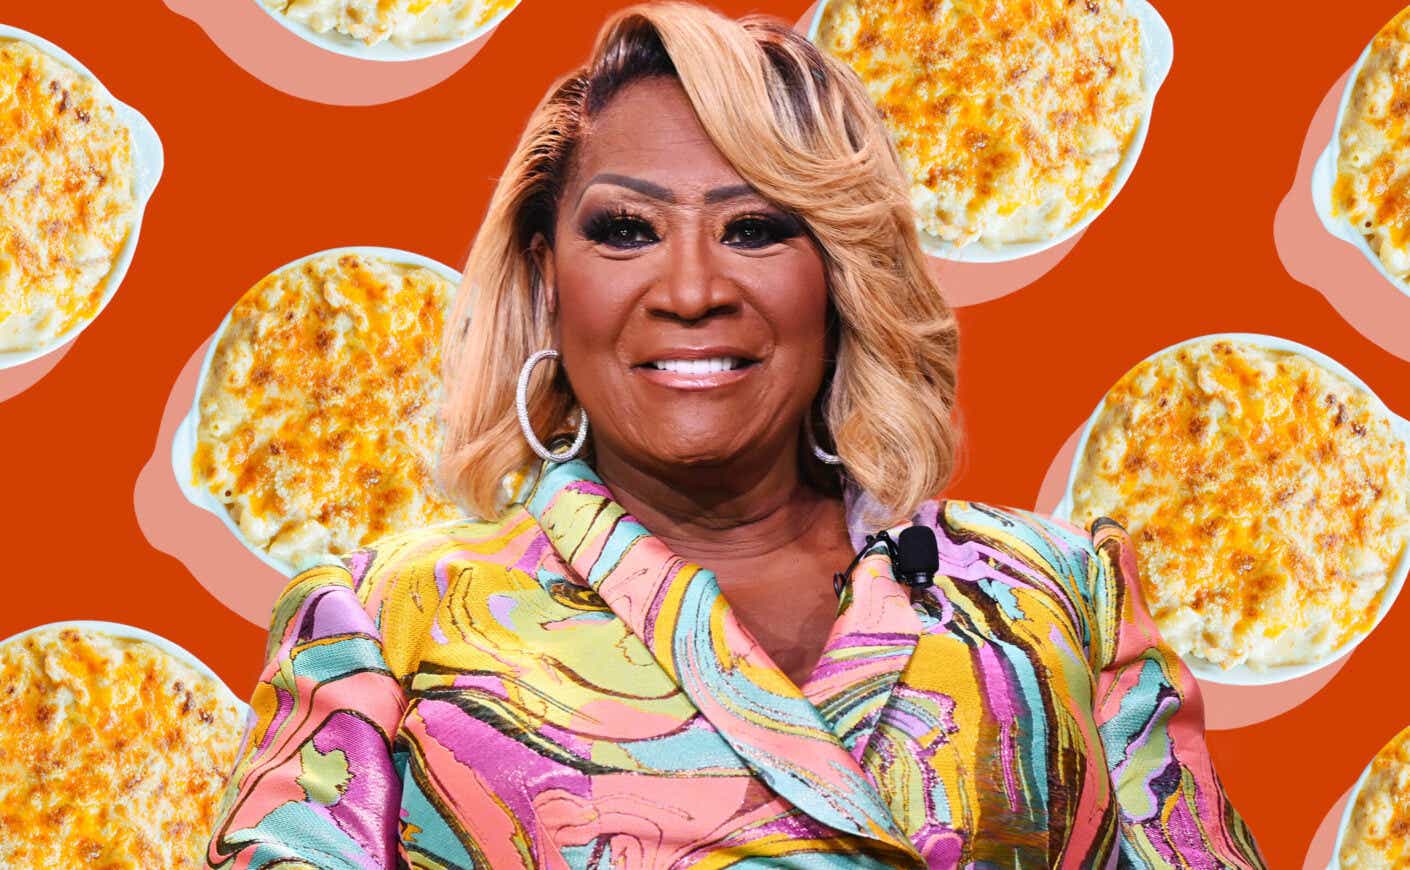 Patti LaBelle is shown in front of collaged images of mac n cheese